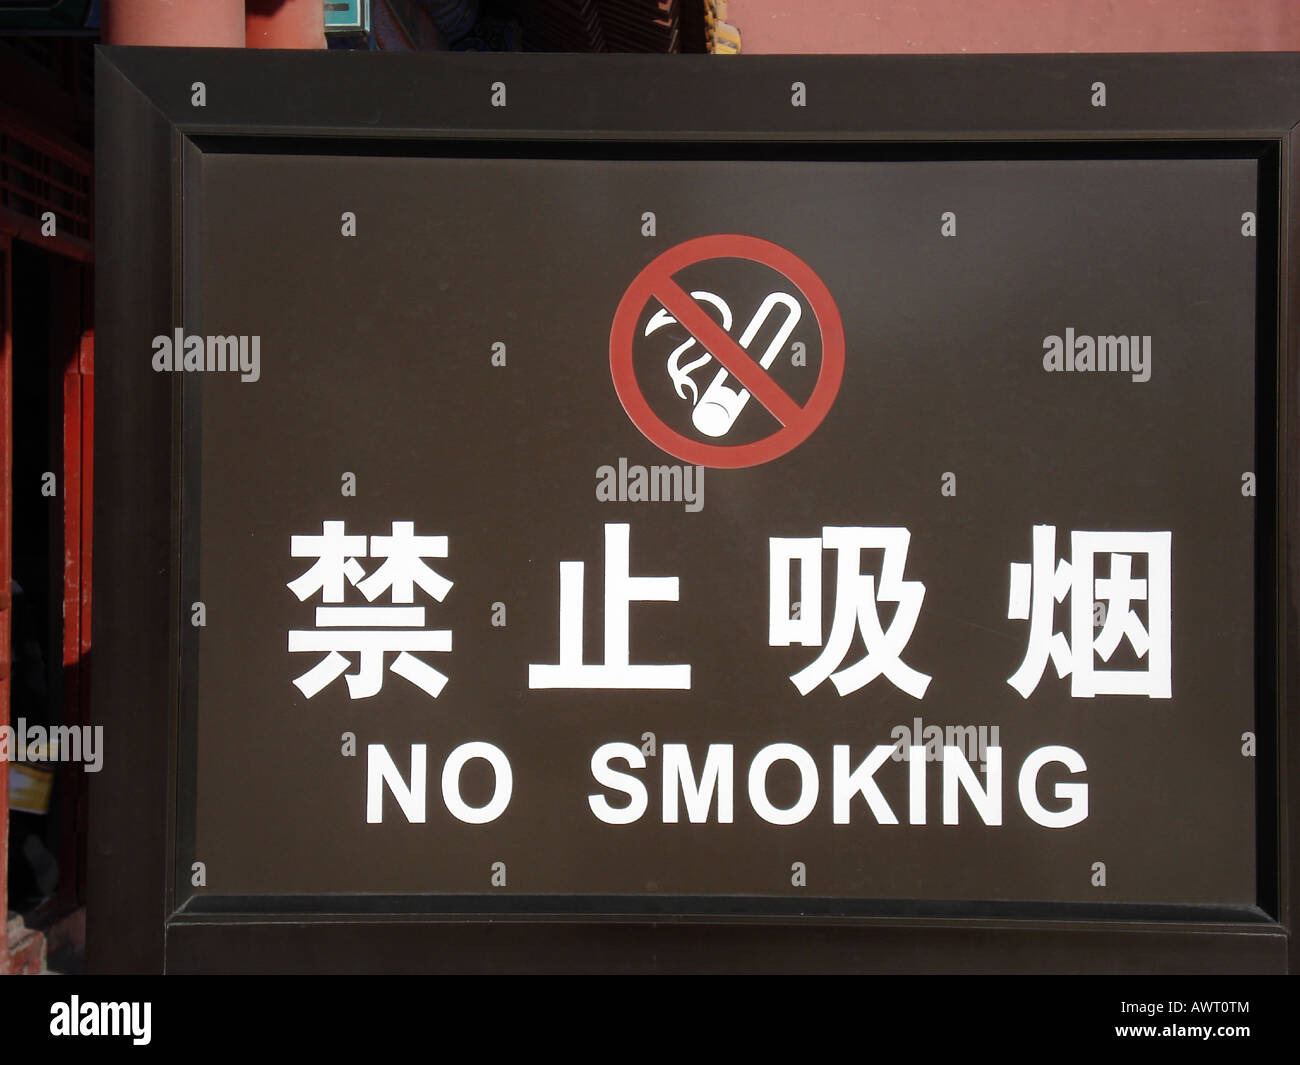 No smoking sign in chinese and english in china Stock Photo